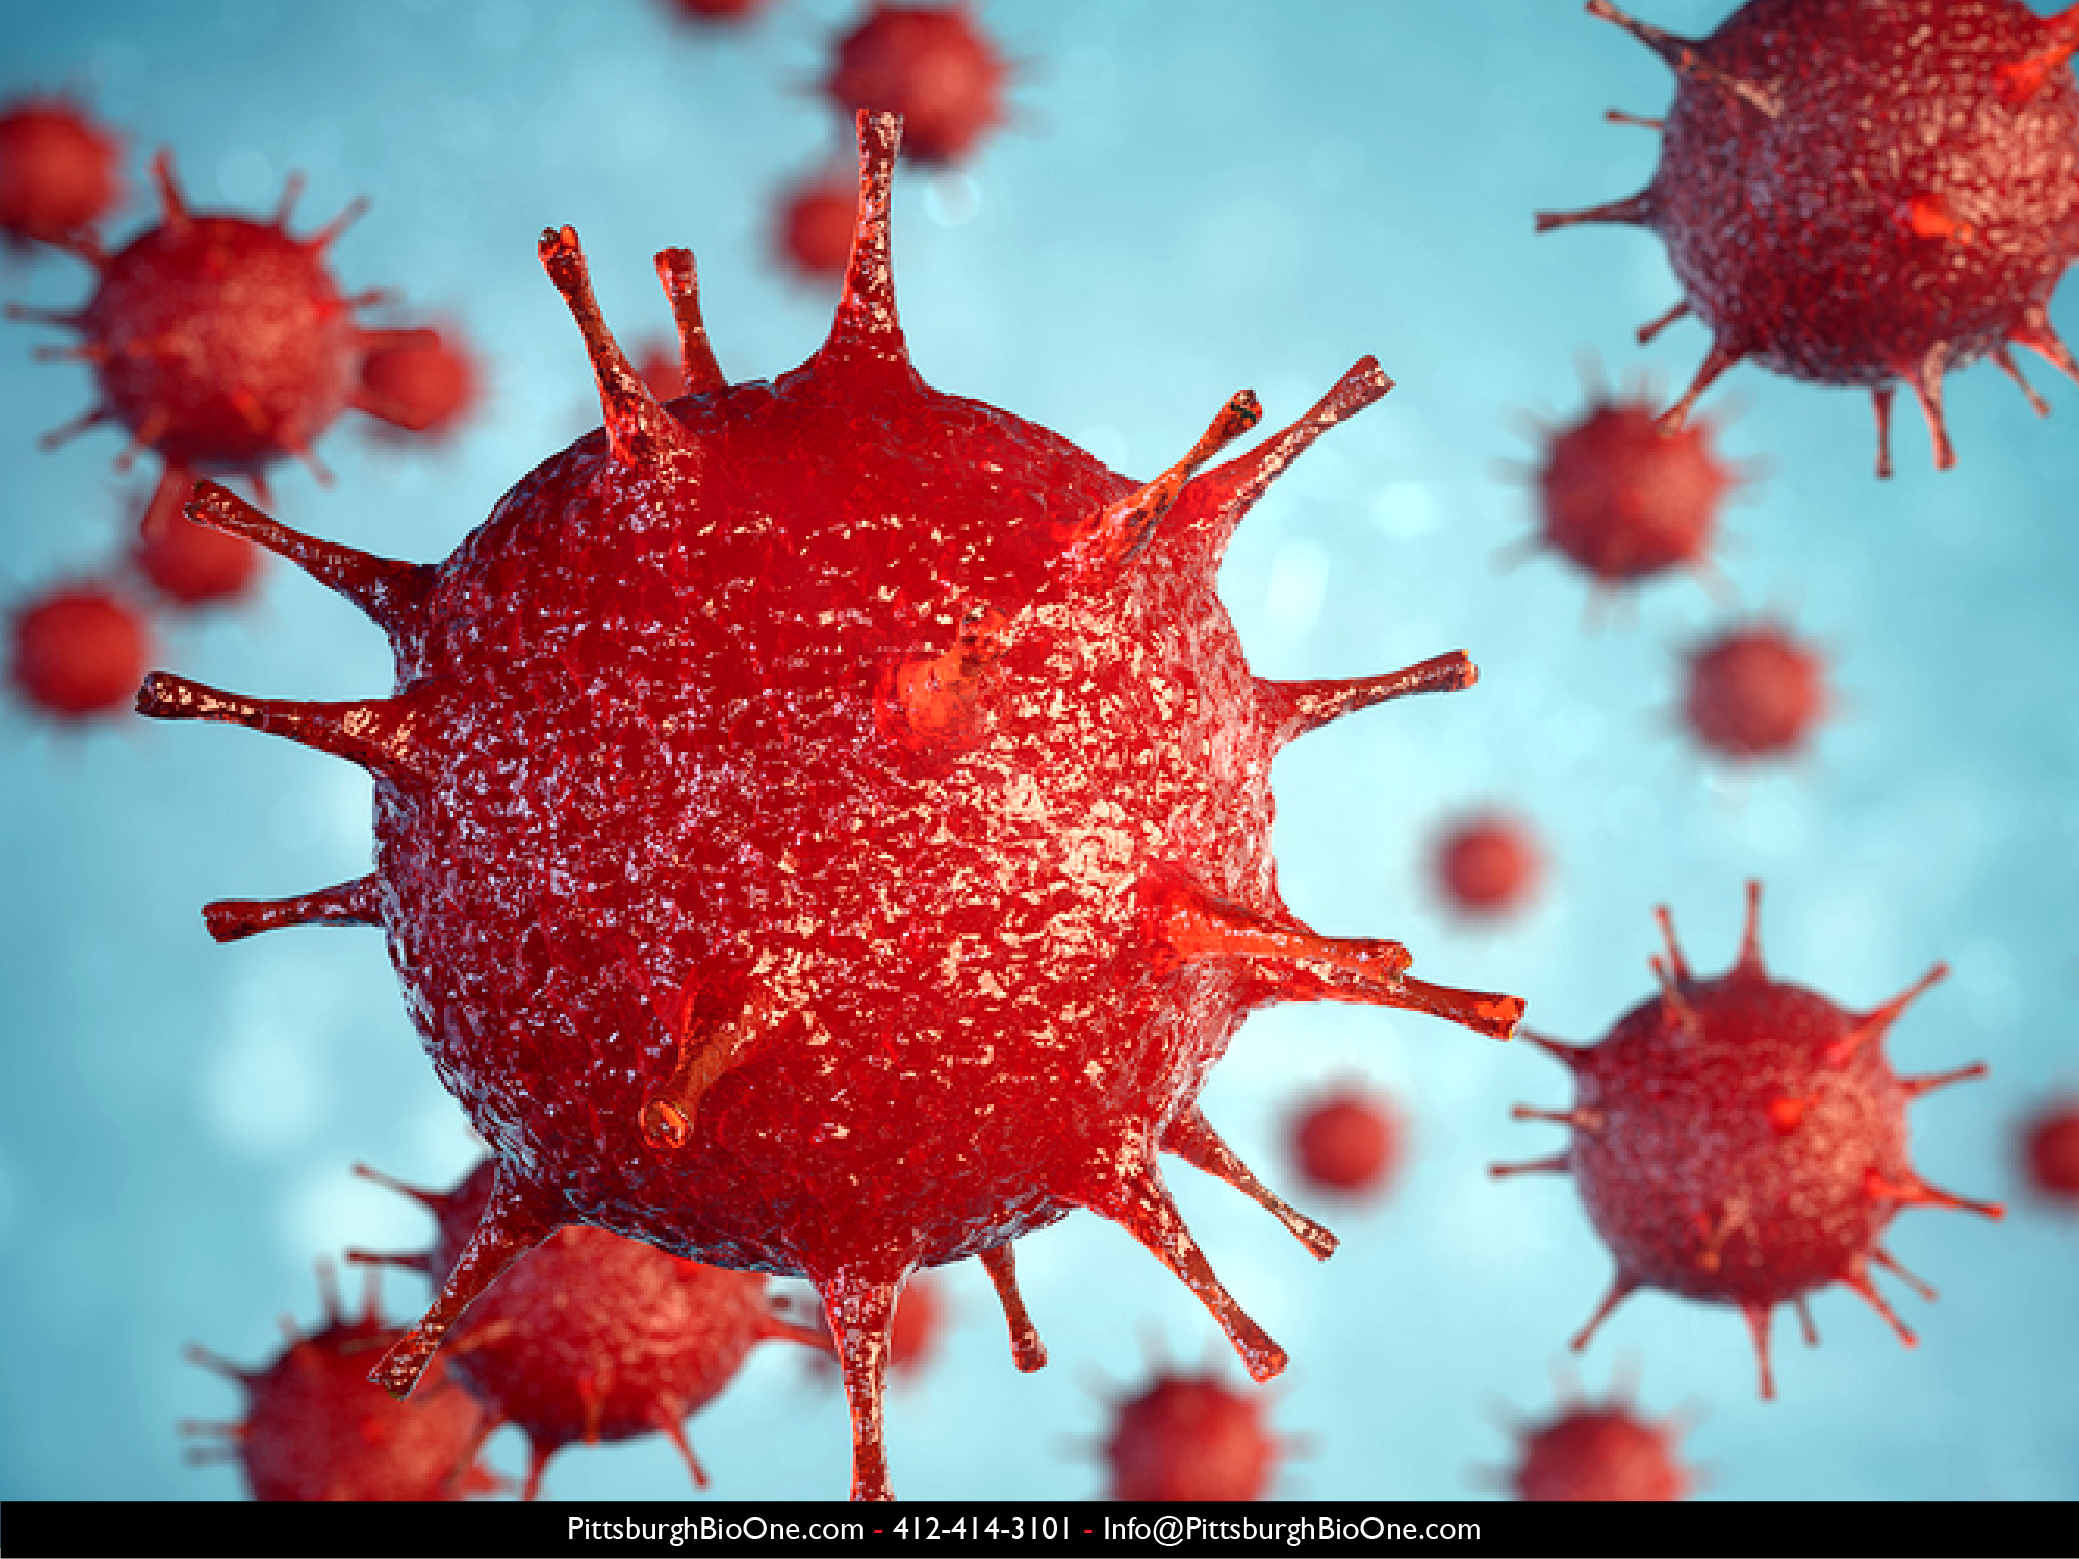 Image shows view of blood cells and blood pathogens.